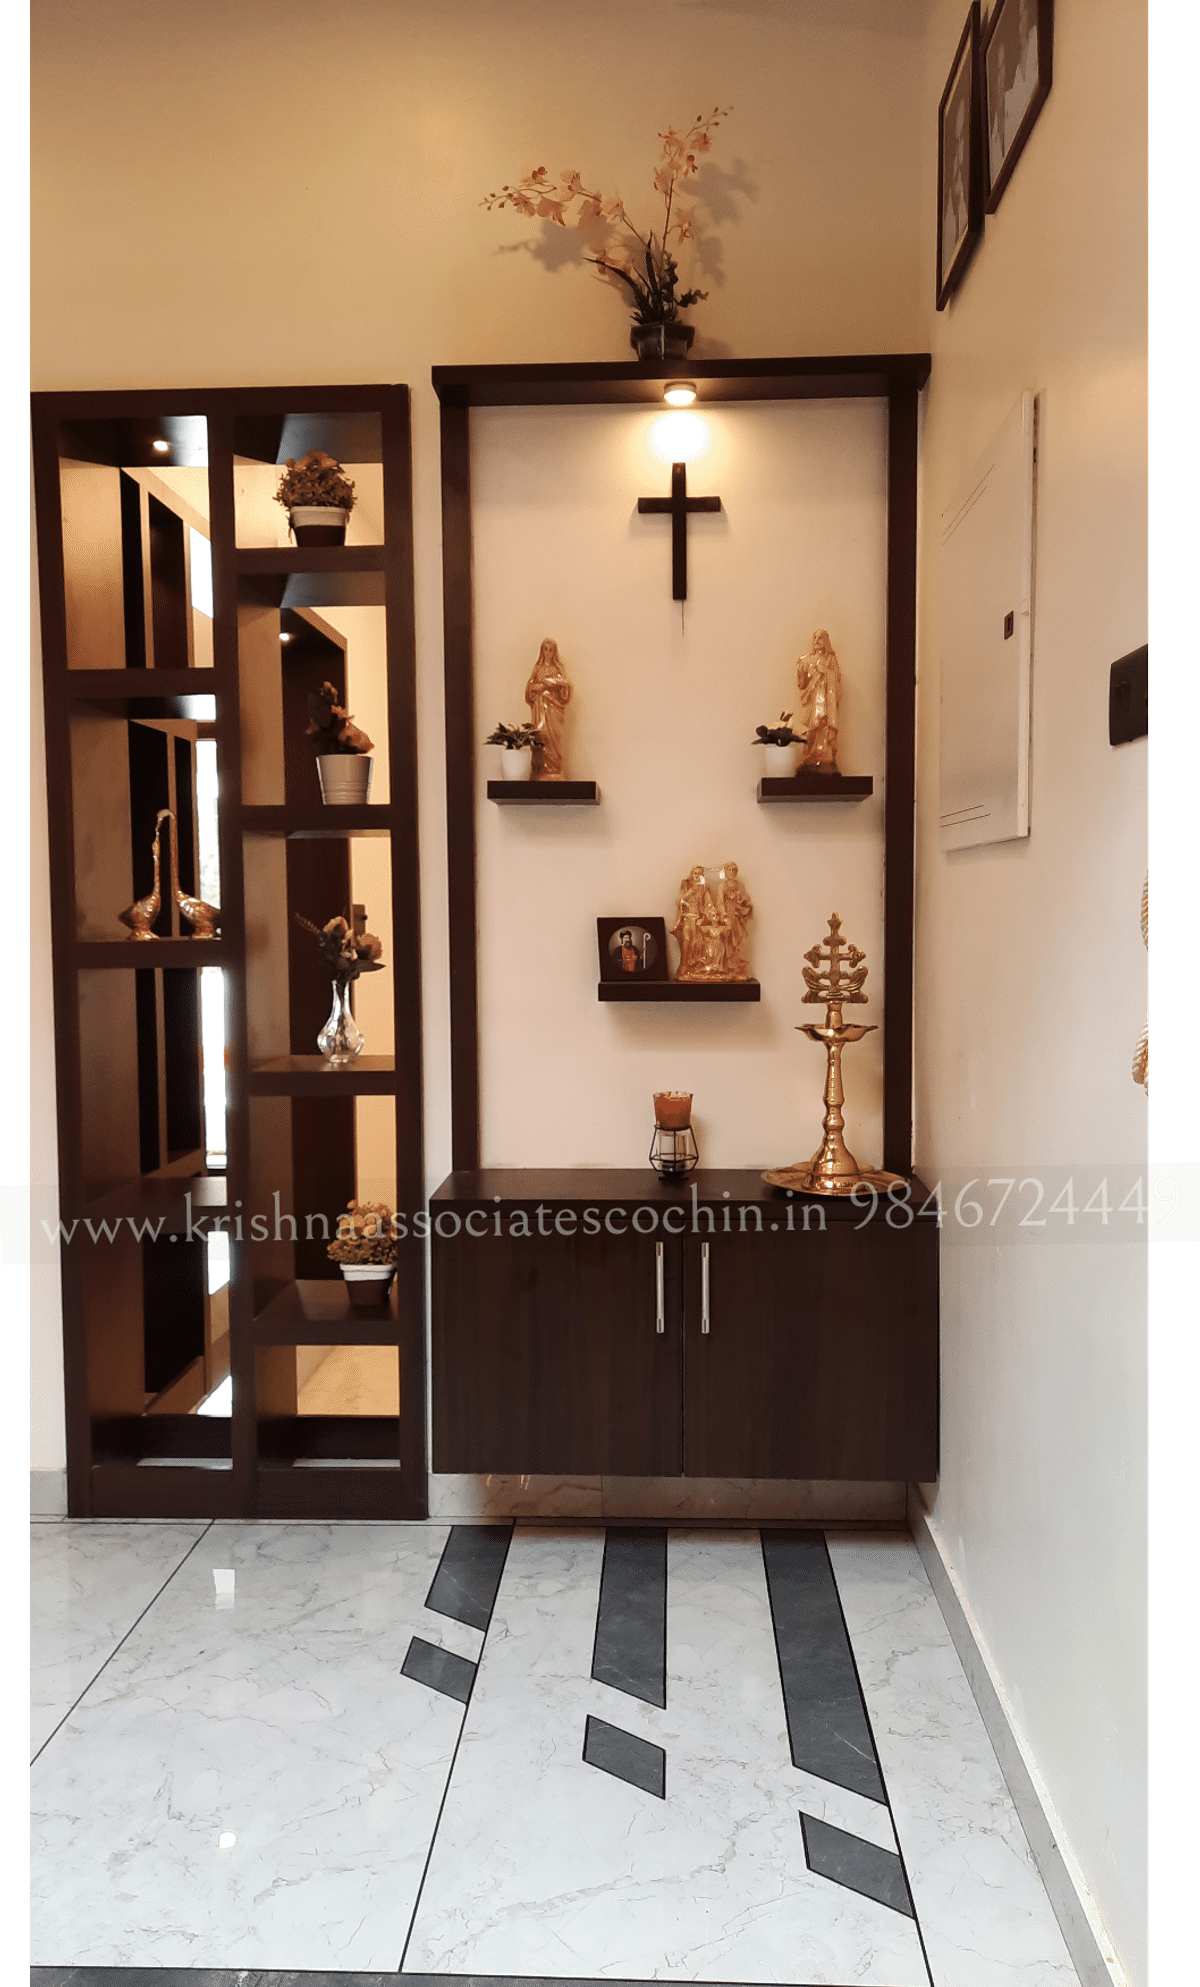 prayer unit

its an inevitable part of interior design particularly for a home.  it always feel pretty where so simple is the design executed.

 #HomeDecor
#homesweethome
#ChristianPrayerRoom
#Architectural&Interior
#Designs